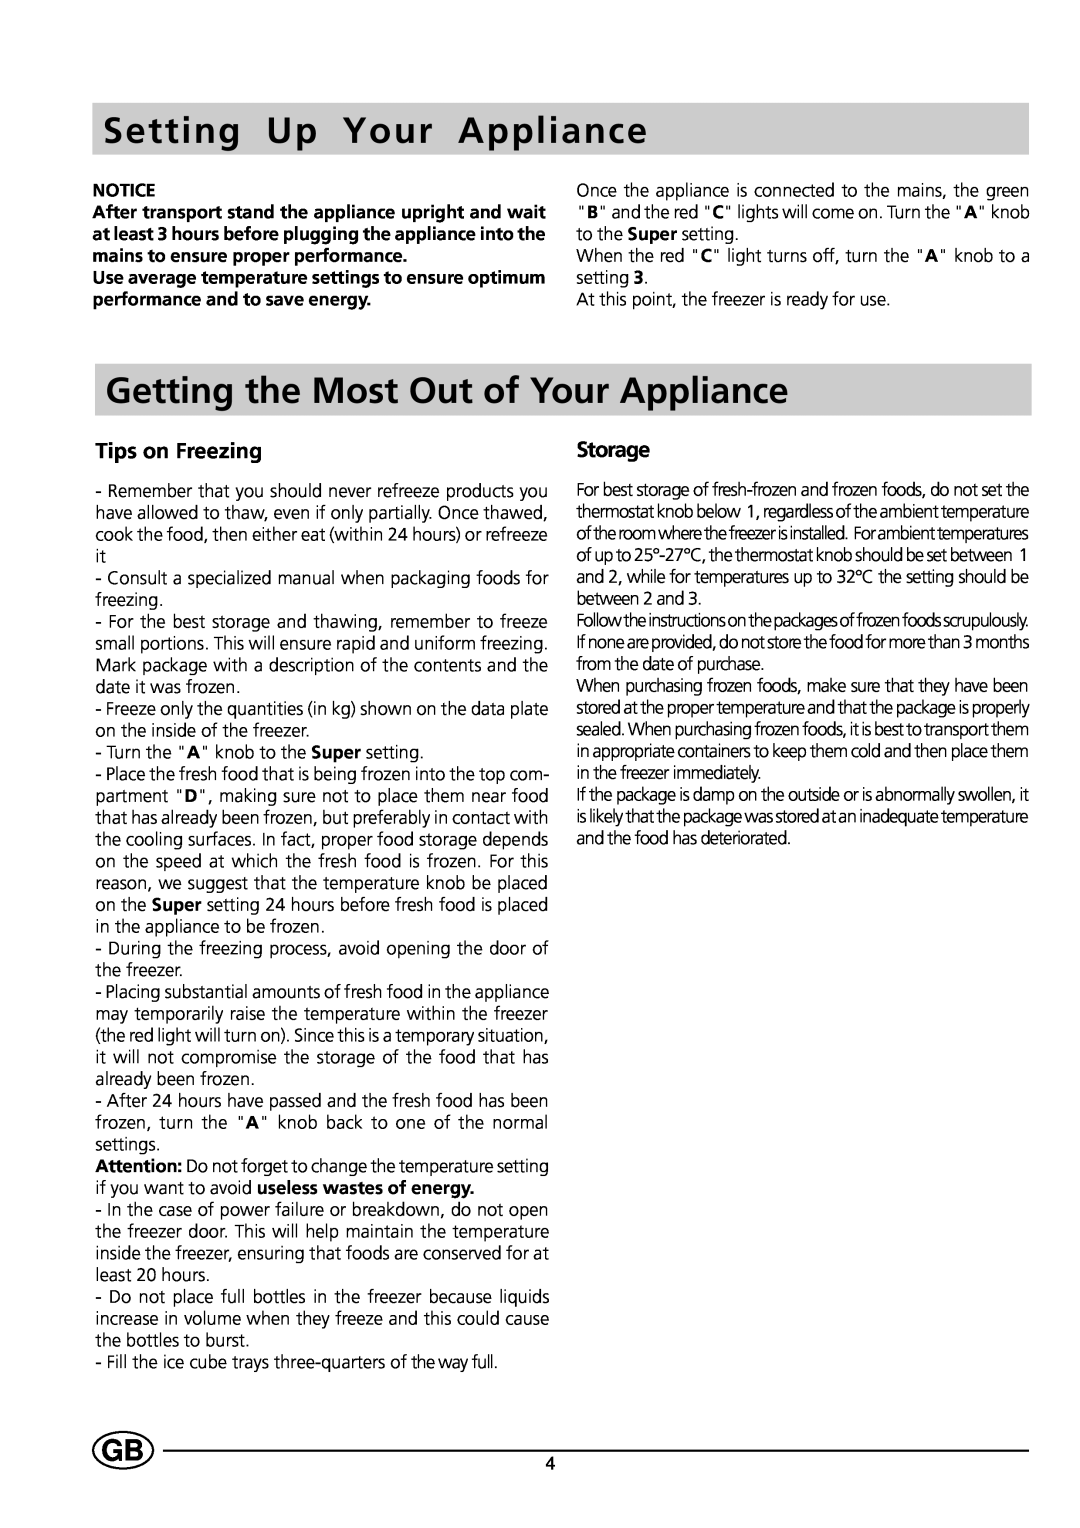 Indesit GSF4100 manual Setting Up Your Appliance, Getting the Most Out of Your Appliance, Tips on Freezing, Storage 